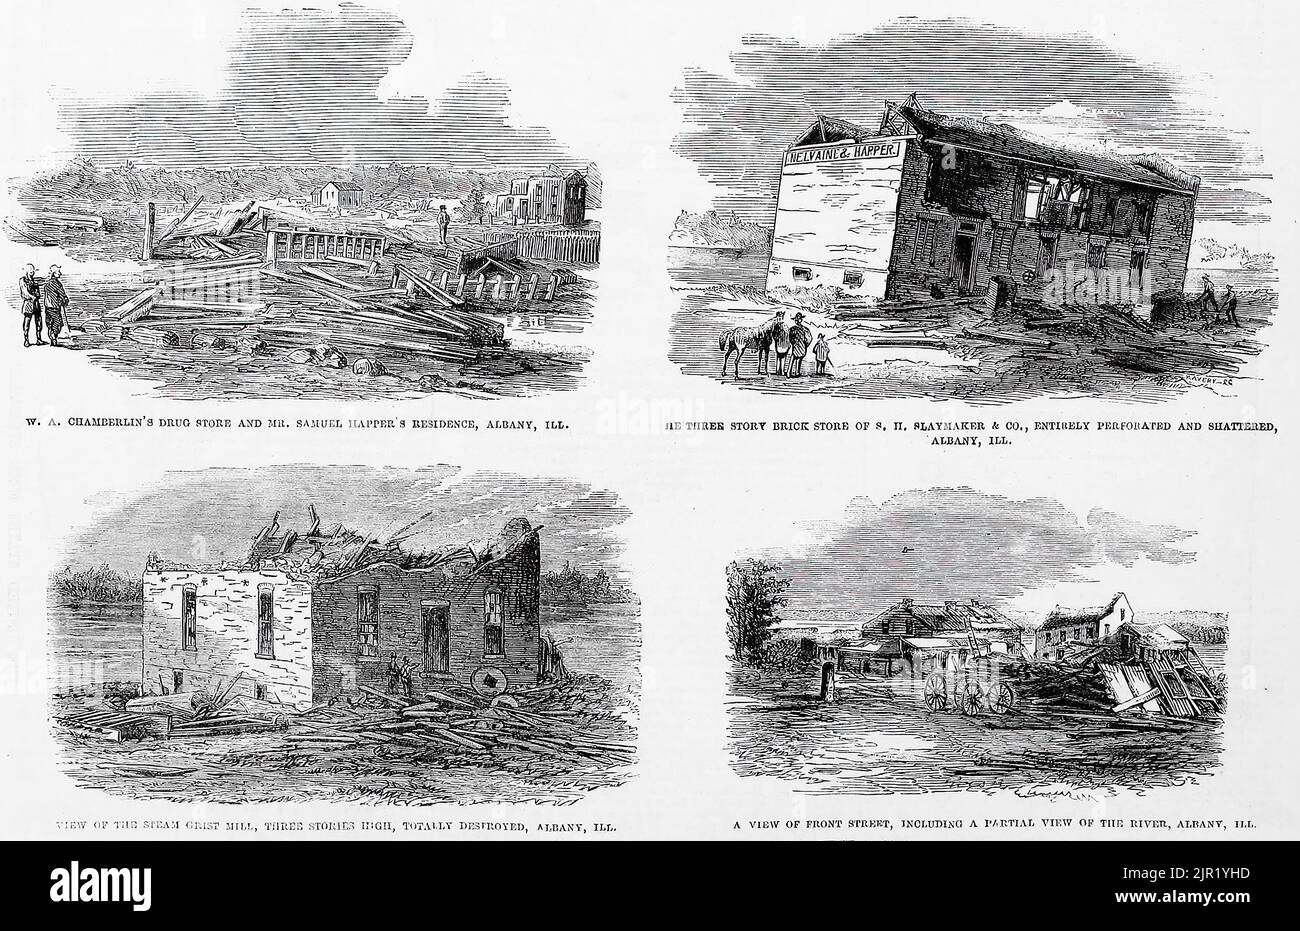 Scenes of destruction in Illinois caused by The Great Camanche Tornado of 1860 - W. A. Chamberlin's drug store and Mr. Samuel Happer's residence - Three story brick store of S. H. Slaymaker, entirely perforated and shattered - Steam grist mill, three stories high, totally destroyed. June, 1860. 19th century illustration from Frank Leslie's Illustrated Newspaper Stock Photo